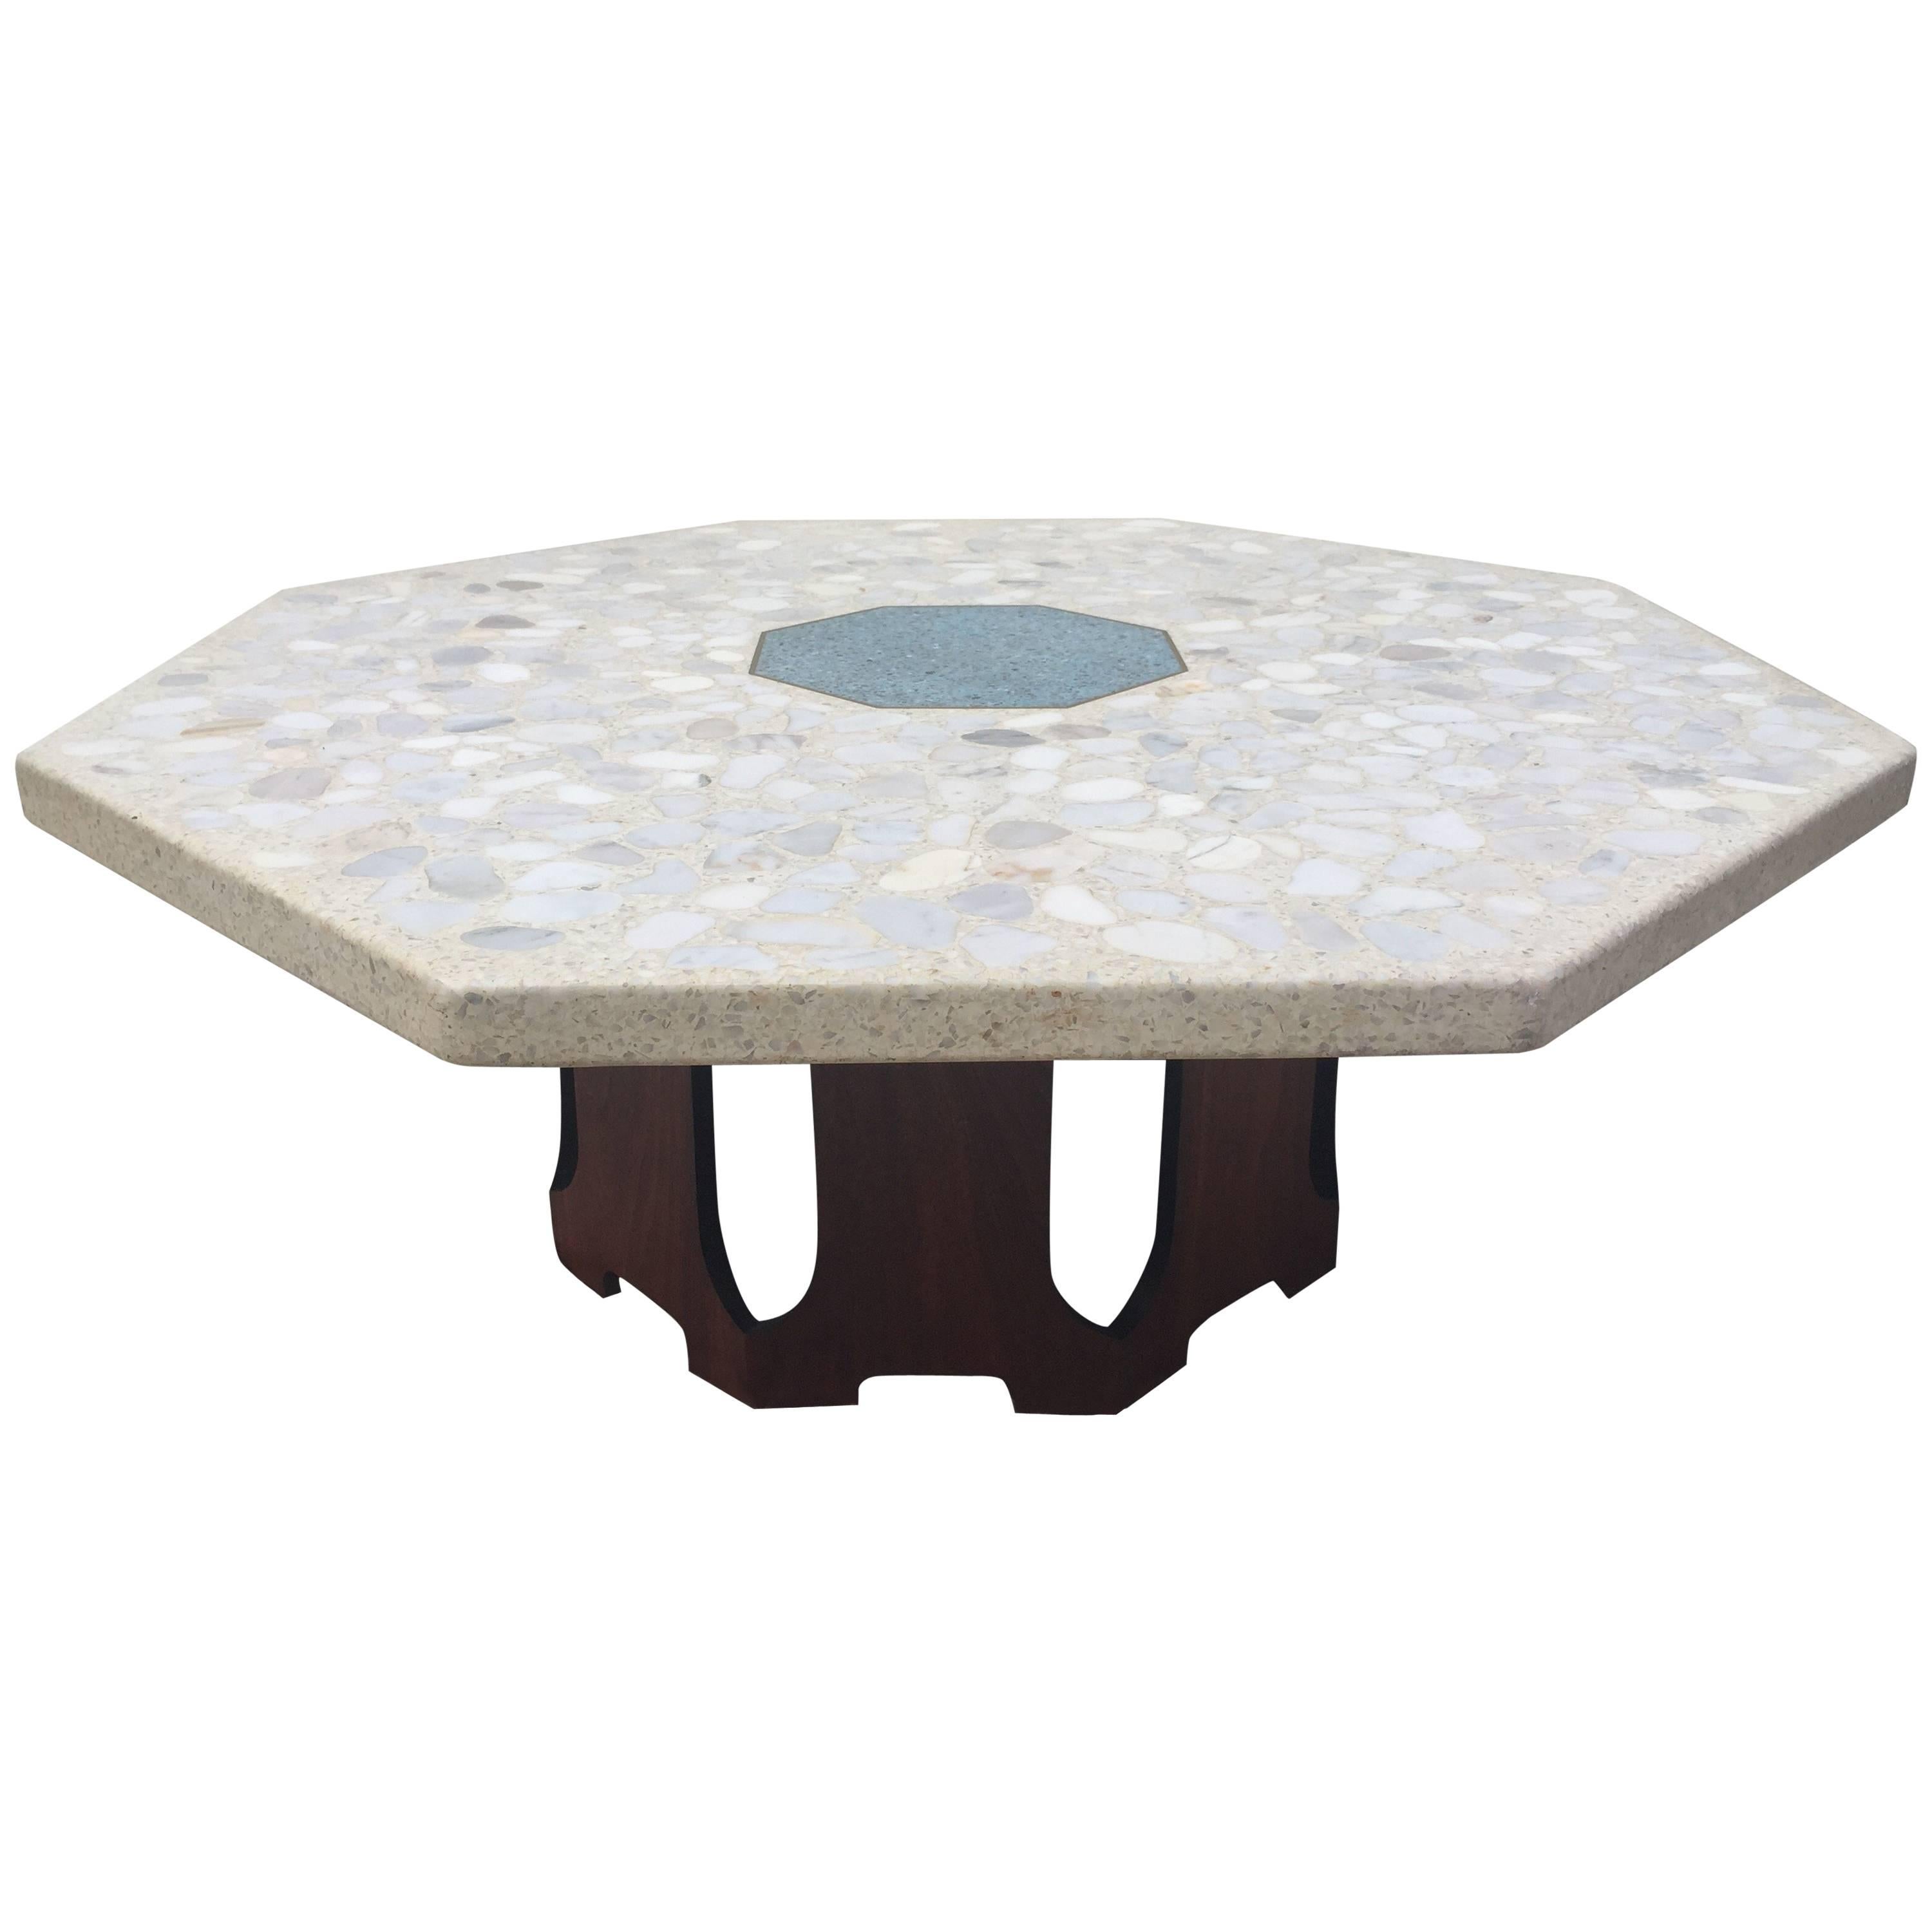 Harvey Probber Terrazzo Inlaid Turquoise Centre Coffee Table or Cocktail Table